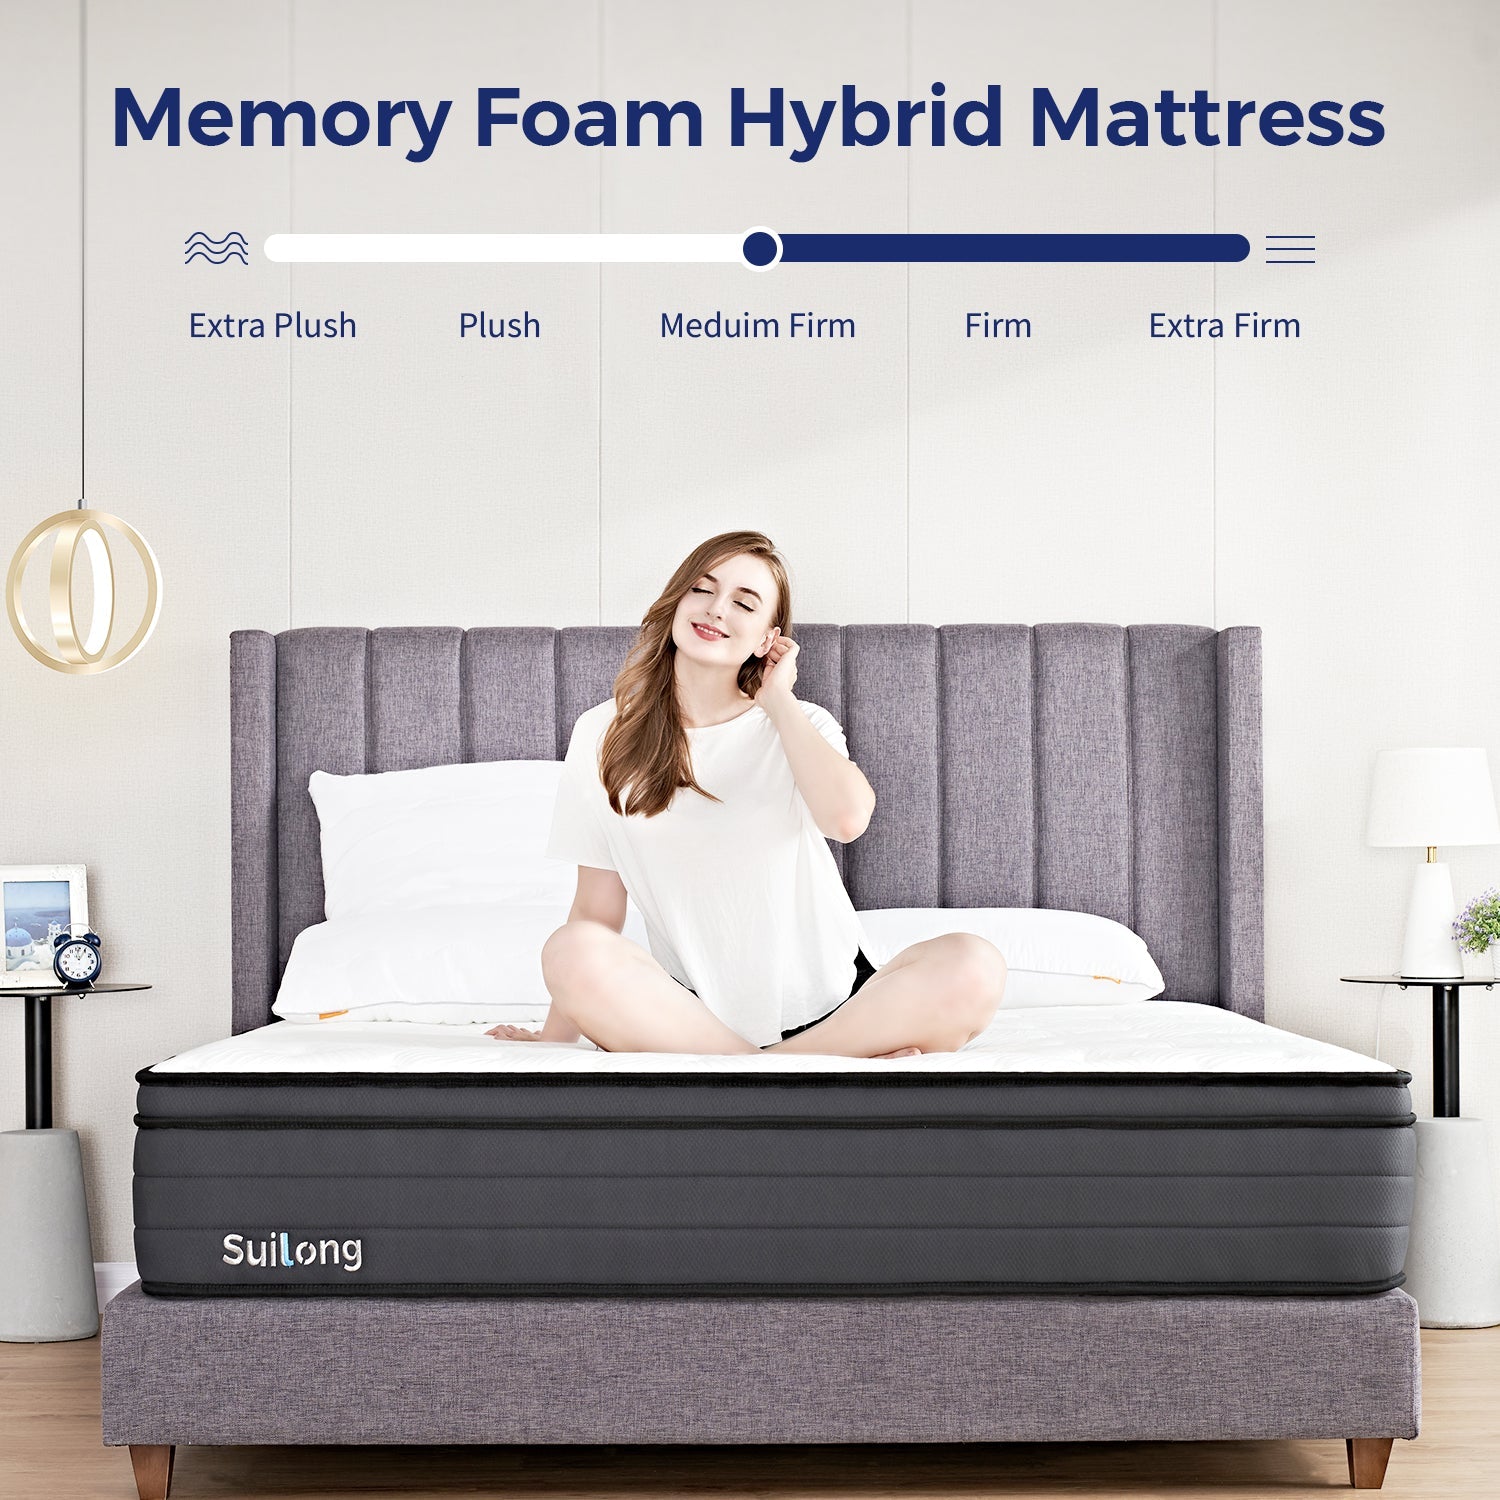 Suilong Utopia 30cm Gel Memory Foam And Pocket Innerspring Hybrid Mattress - The only Memory Foam Mattress you will ever need!